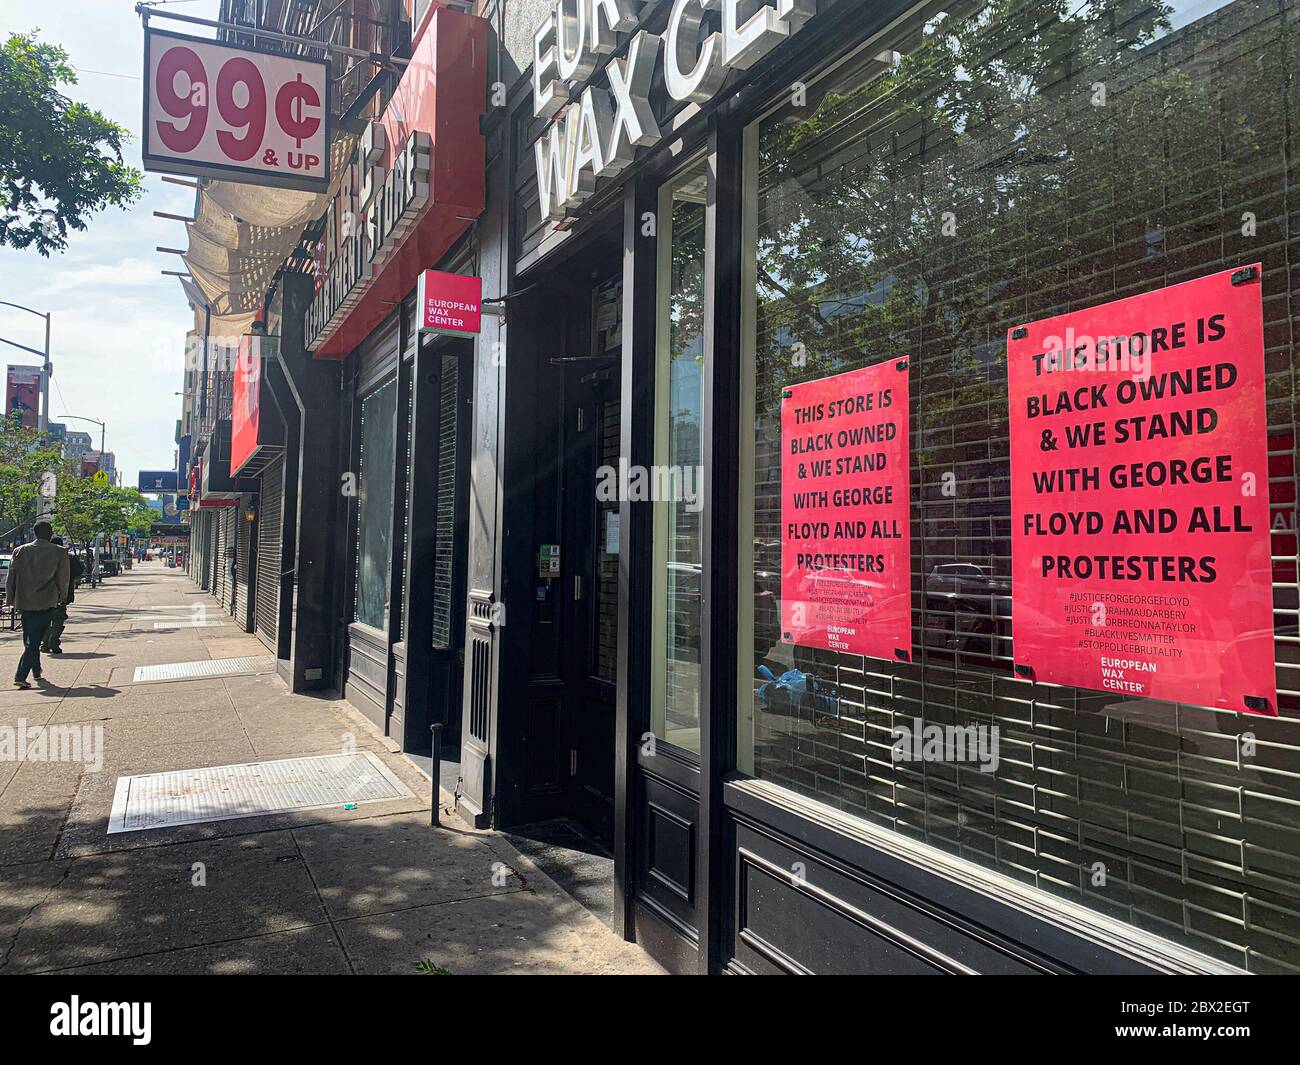 New York, New York, USA. 4th June, 2020. (NEW) Stores owners fear looting by protesters. June 4, 2020, Harlem, New York, USA: Some stores owners board their stores with plywoods while other place poster to deter protesters from looting their businesses in Harlem during protests for justice for George Floyd who was killed by the Police last month in Minneapolis.Credit: Niyi Fote /Thenews2. Credit: Niyi Fote/TheNEWS2/ZUMA Wire/Alamy Live News Stock Photo